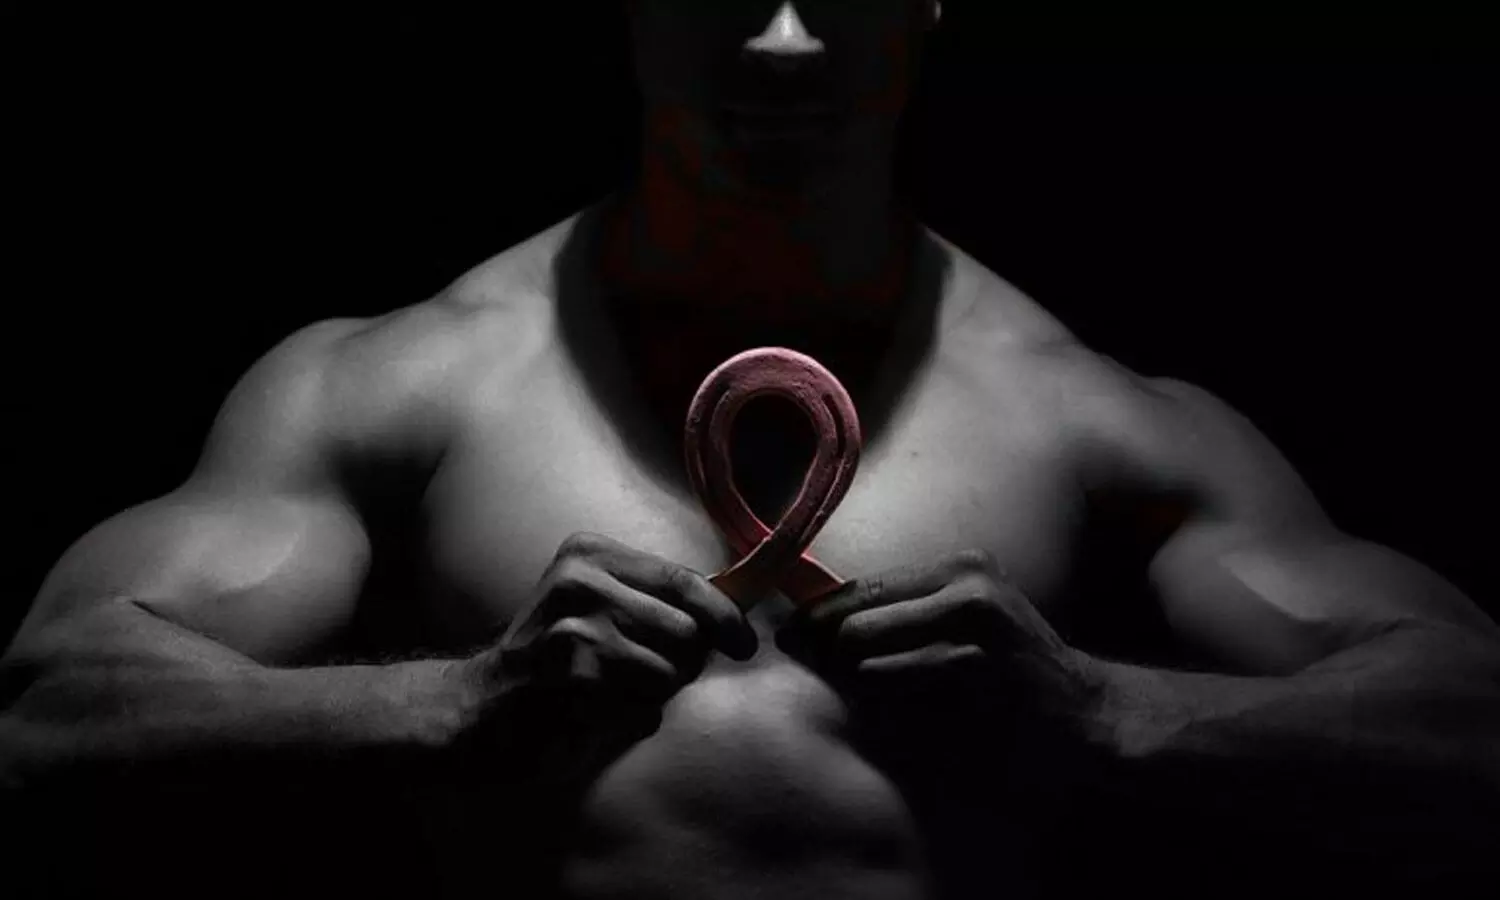 Tamoxifen improves survival in male breast cancer patients, finds study